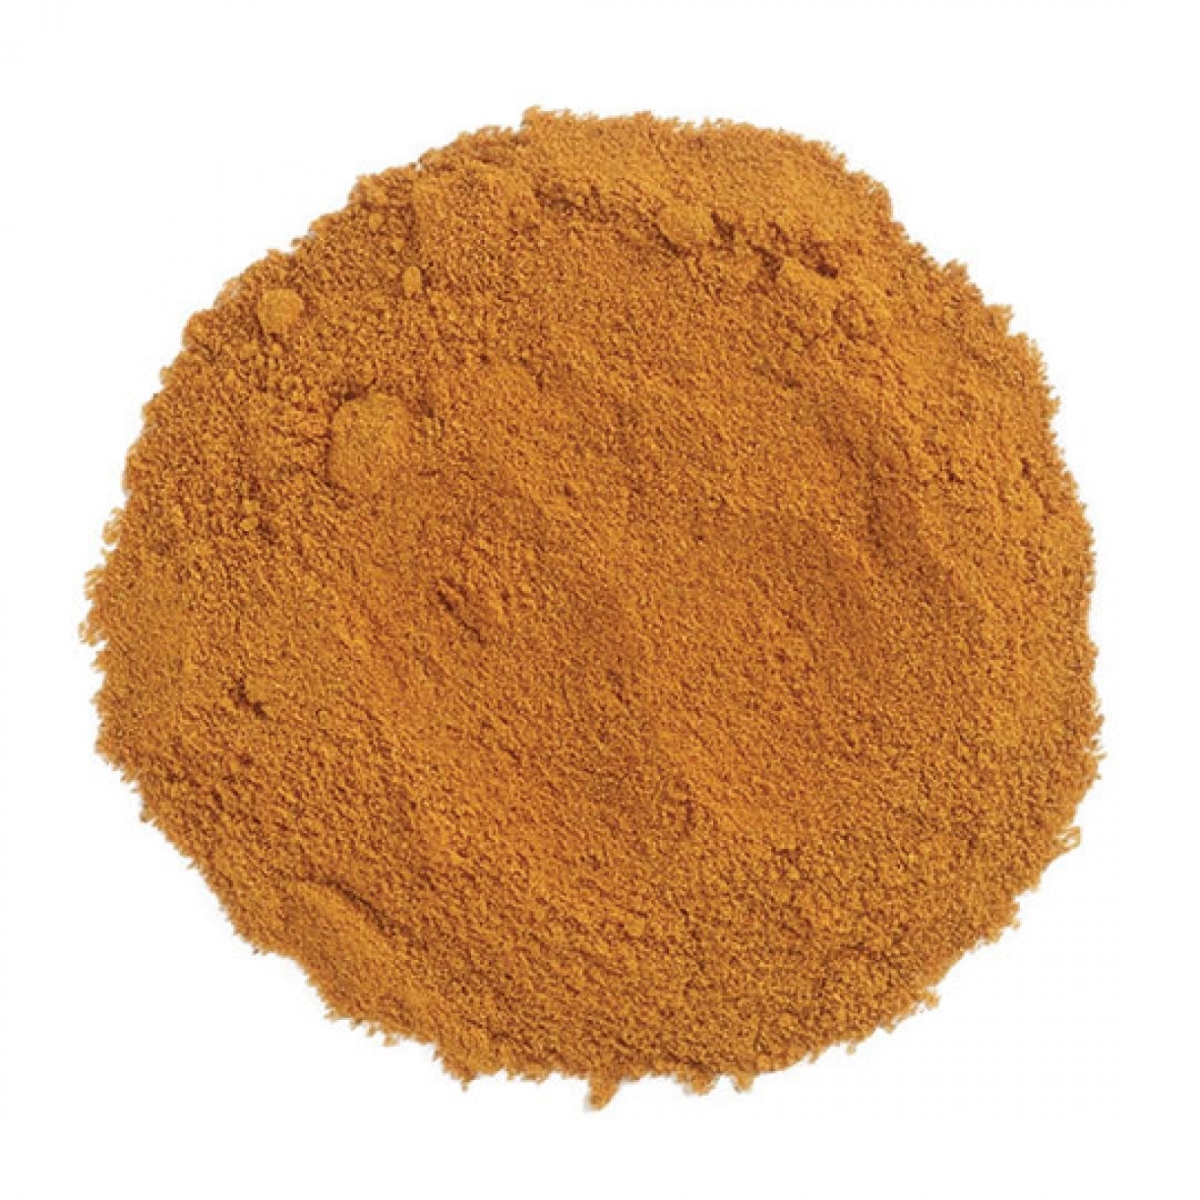 Picture of Frontier 31075 Organic Turmeric Root Ground Powder